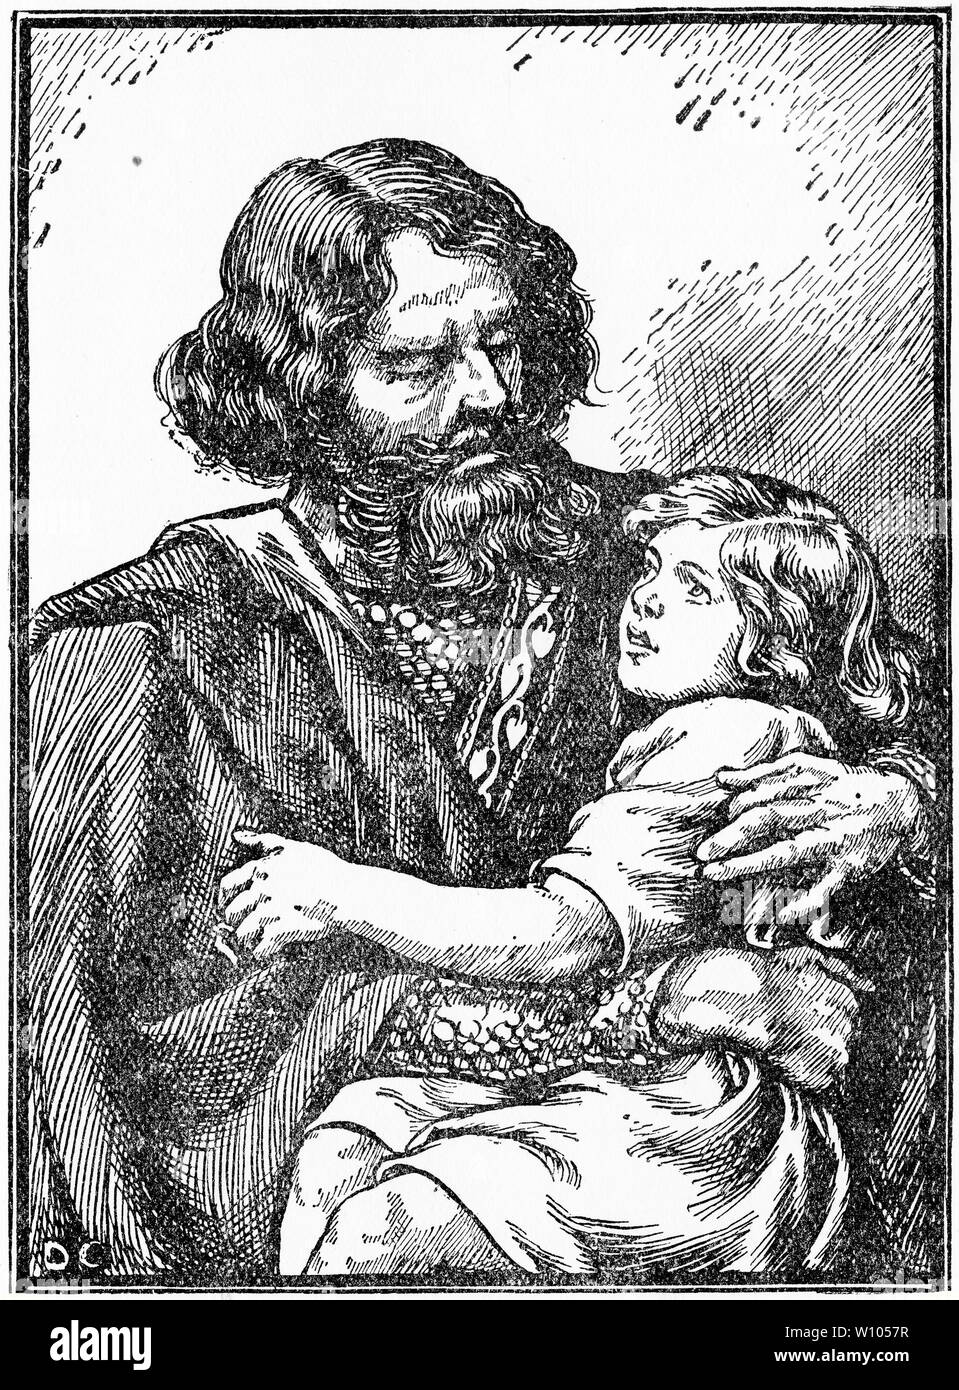 Engraving of William Longsword (c. 893 – 942) second ruler of Normandy, with his son Richard I (932 – 996), also known as Richard the Fearless. From an early edition of The Little Duke. Stock Photo